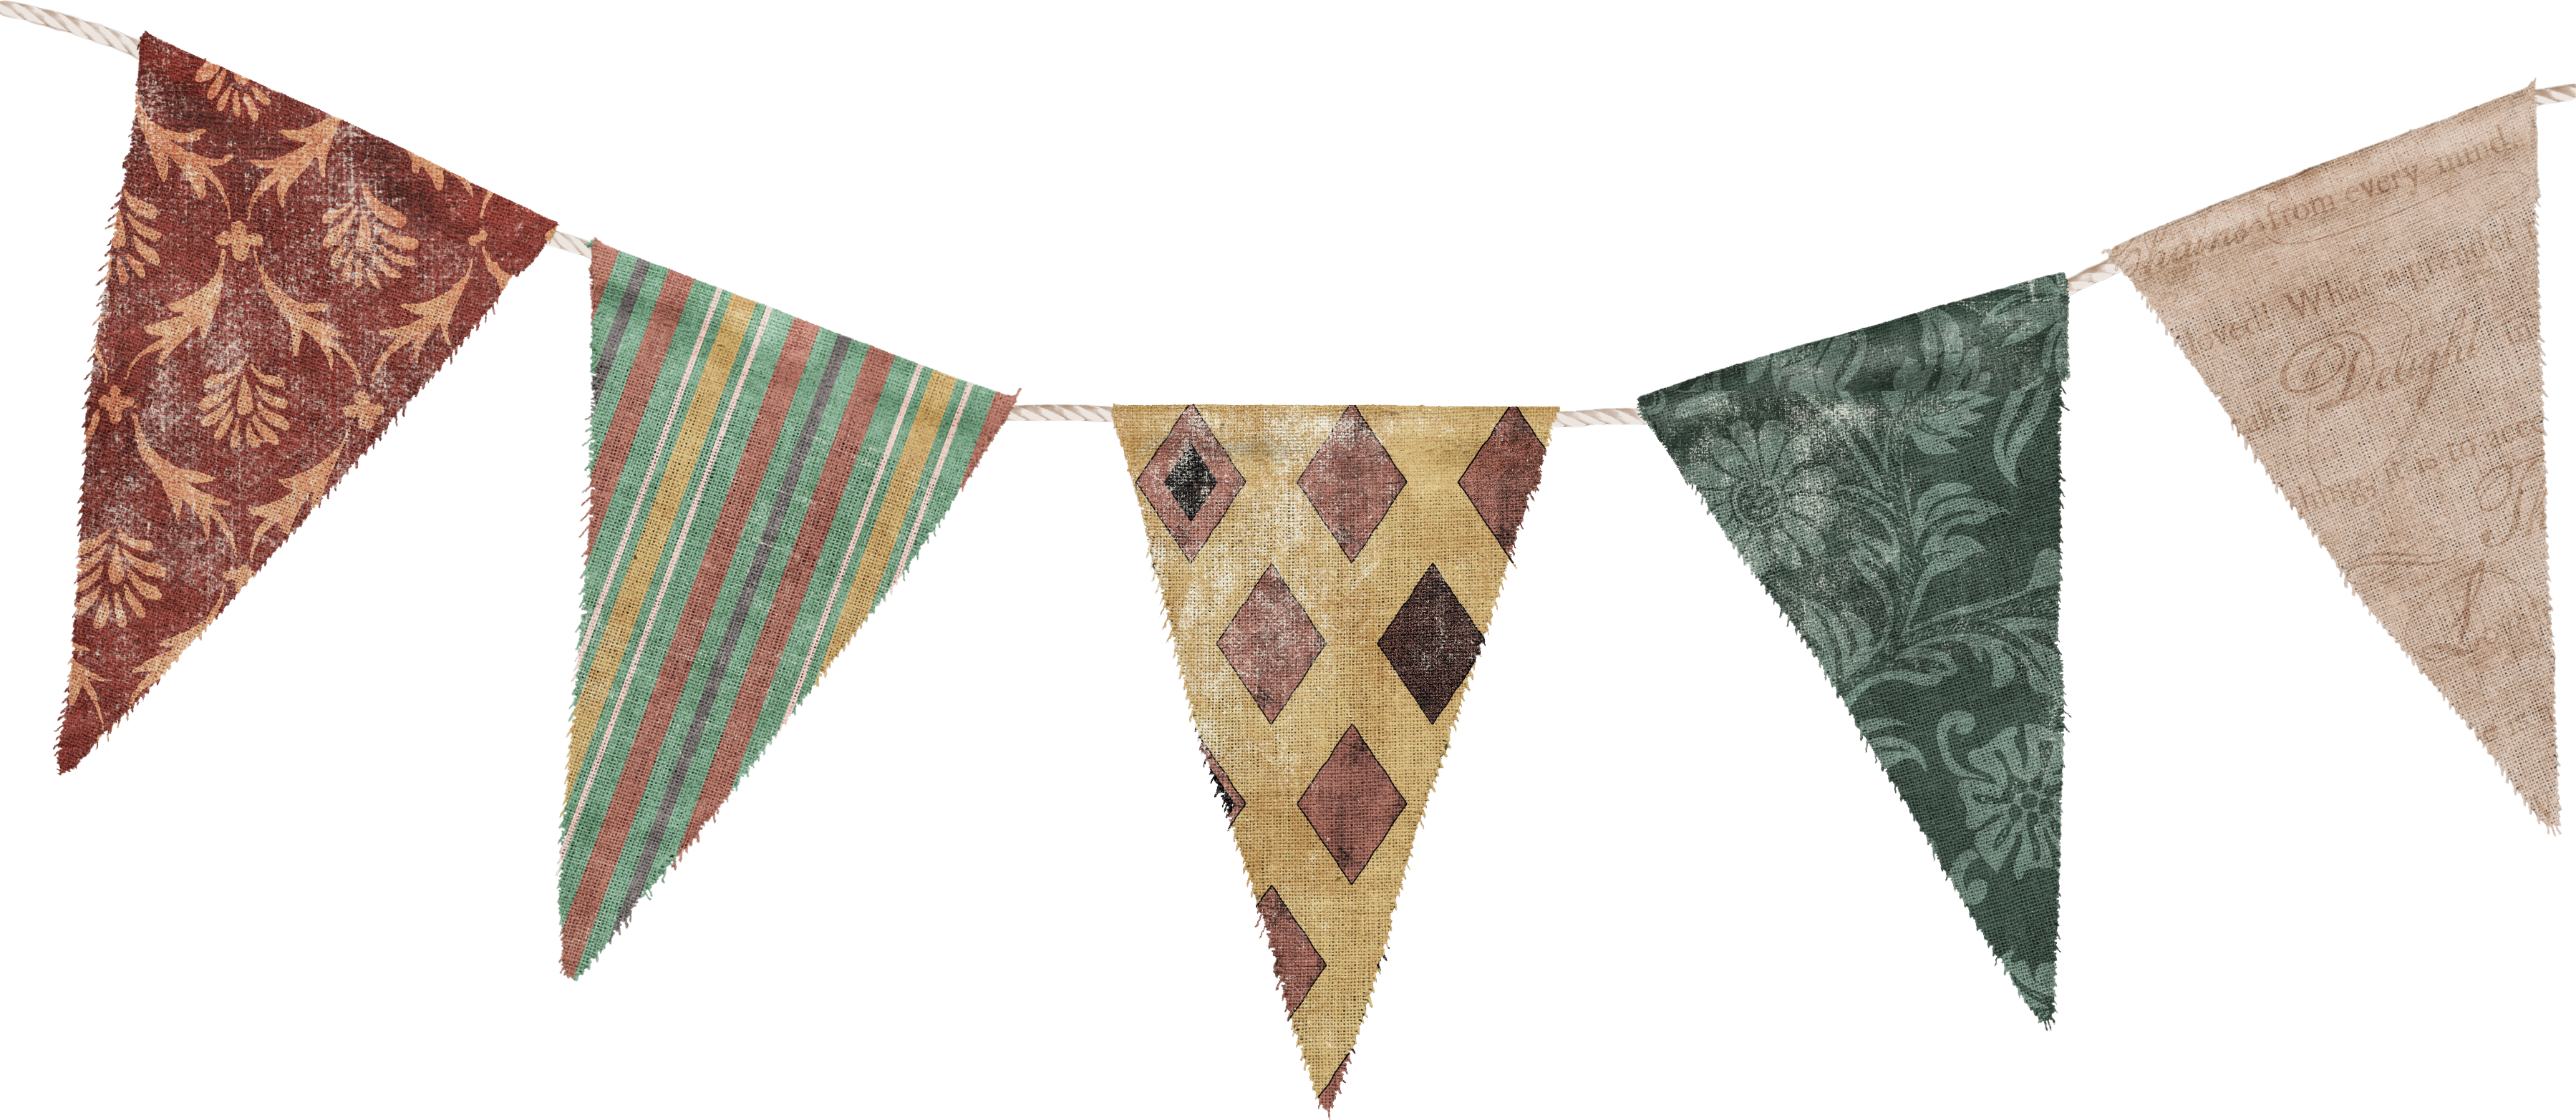 Party flags PNG